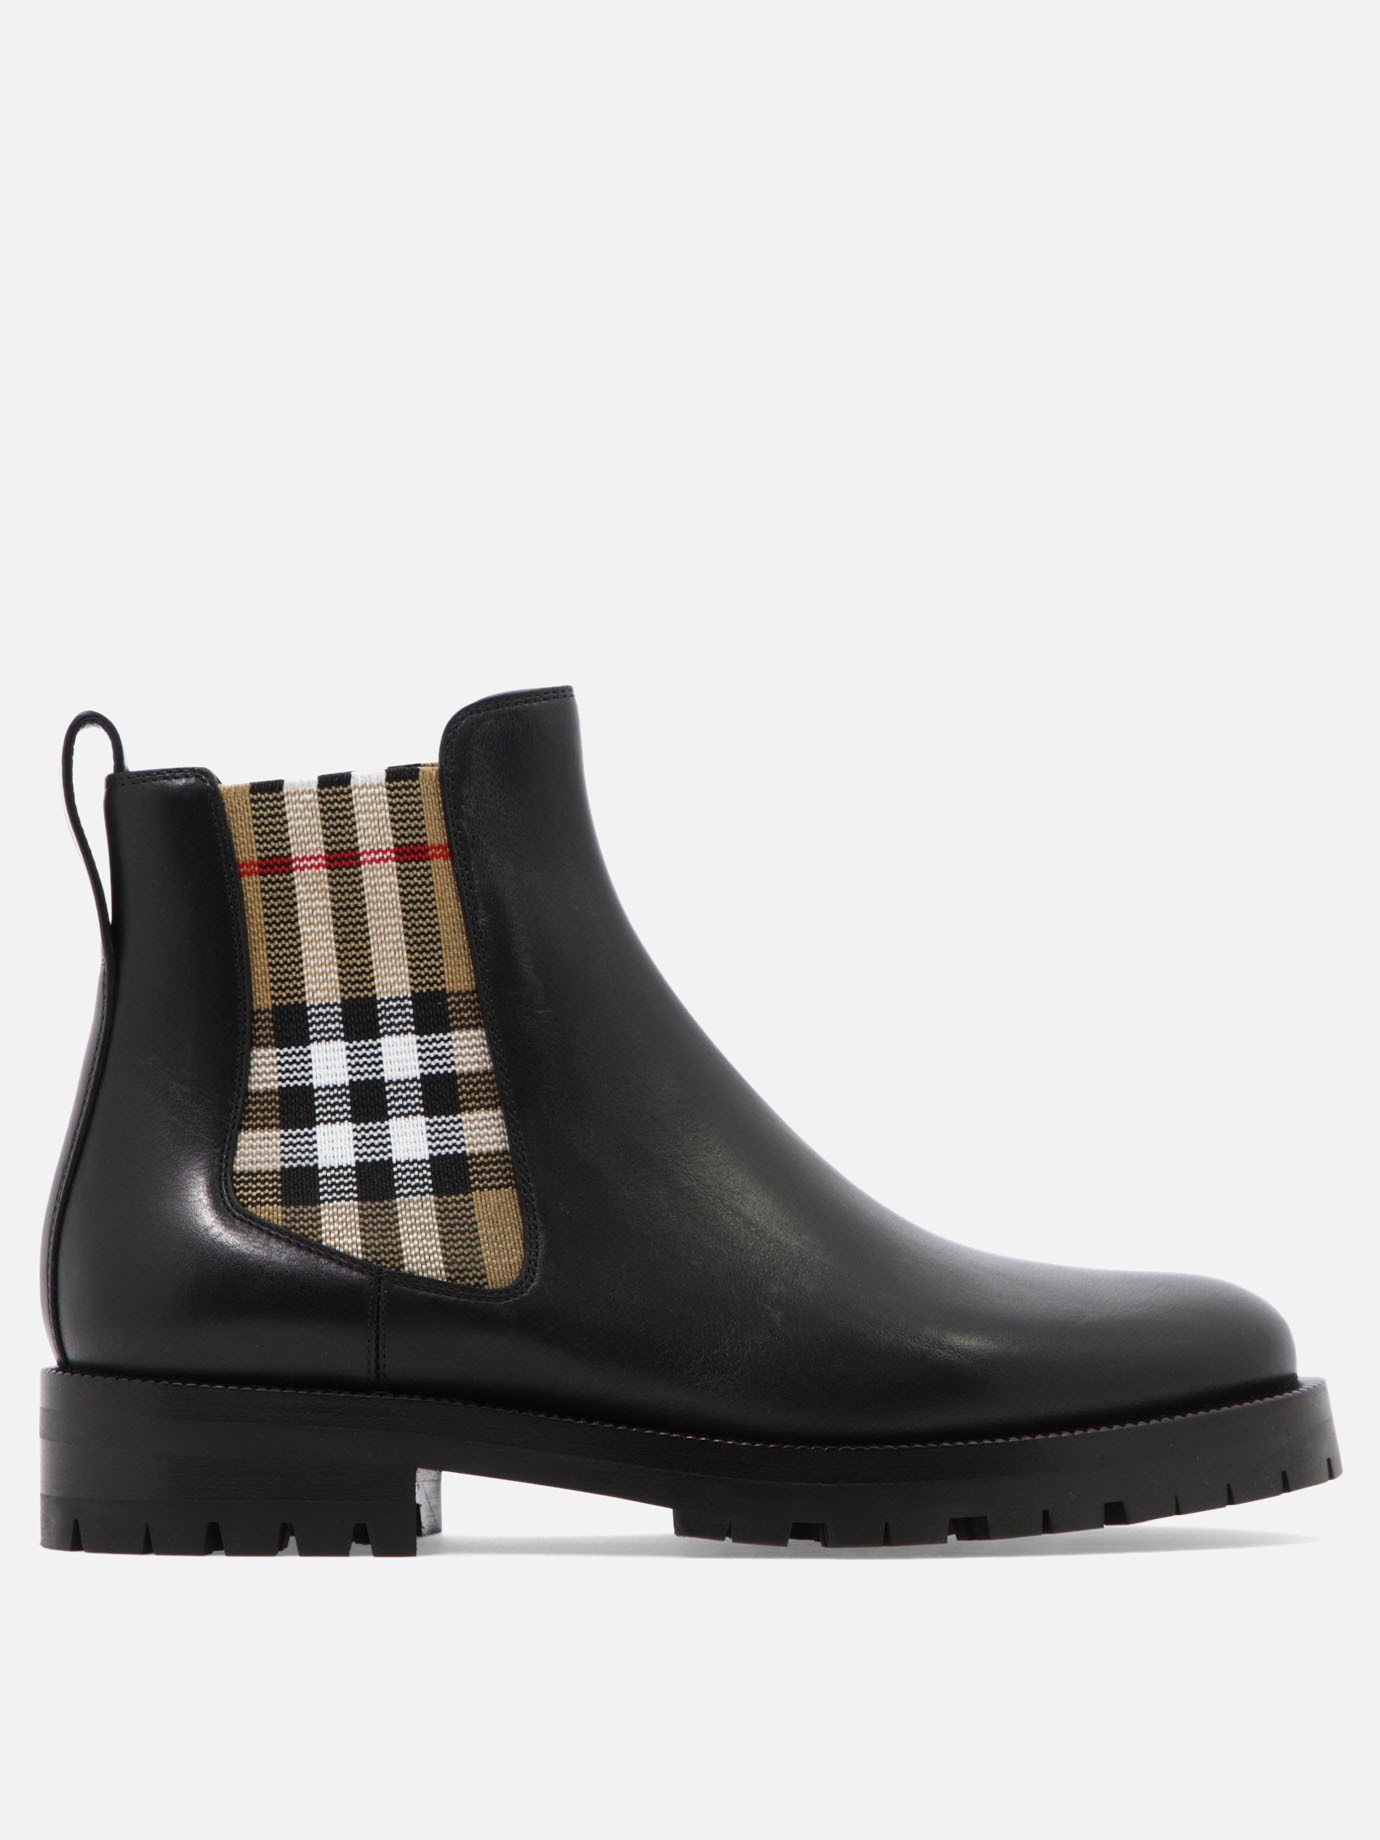  Allostock  ankle bootsby Burberry - 4